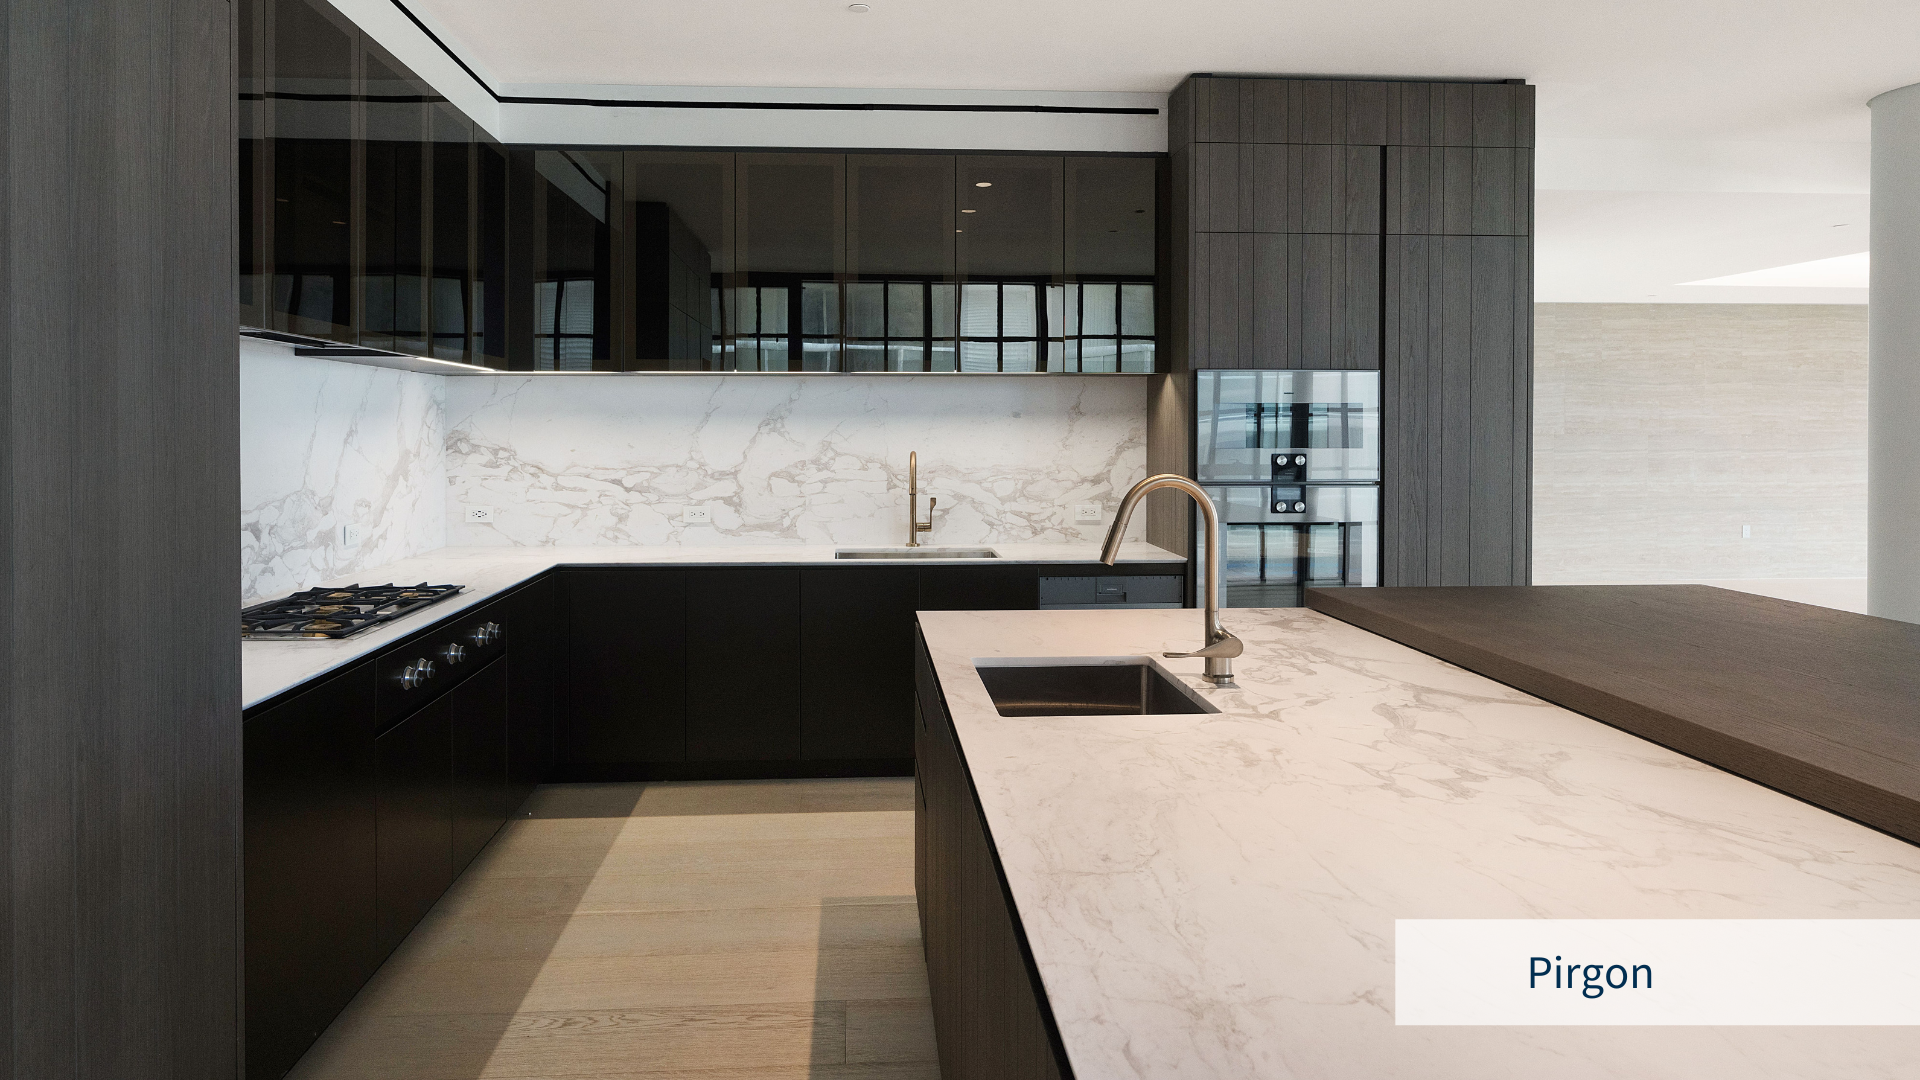 Image of a minimal kitchen with dark brown wenge furniture and Pirgon white Greek marble installed in the kitchen counter and wall cladding backsplash